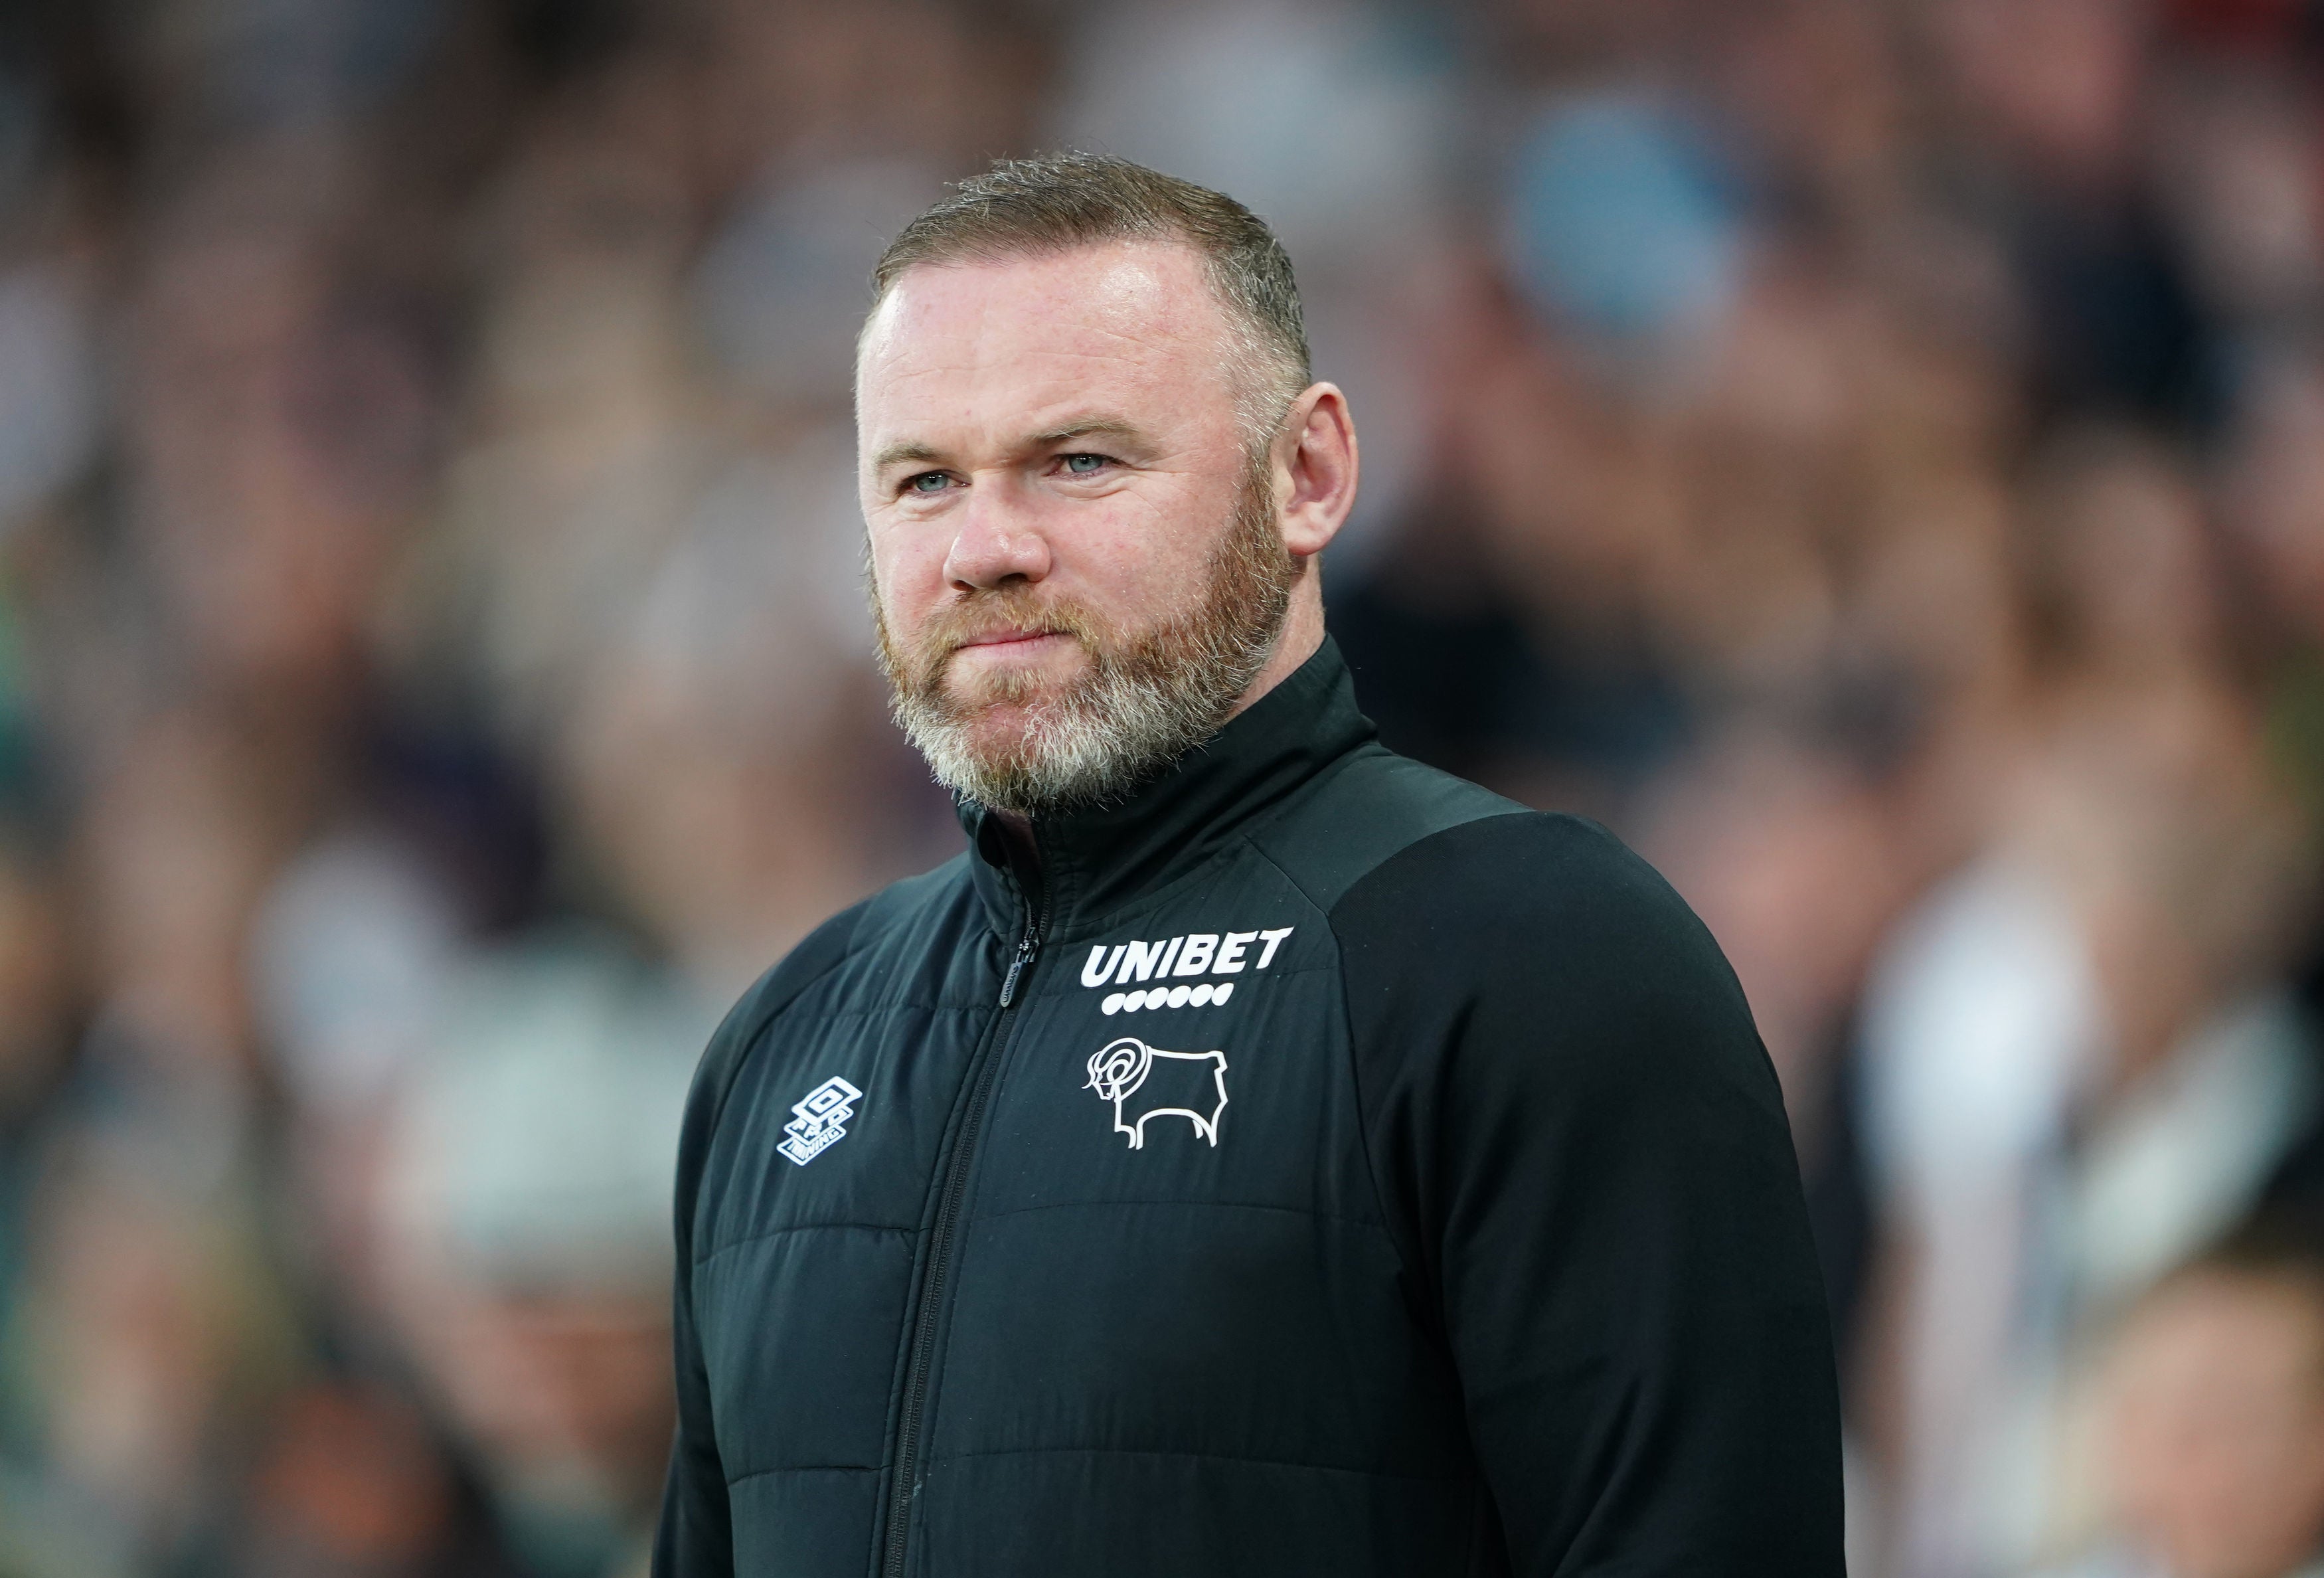 Rooney joined the club as player-coach in 2020